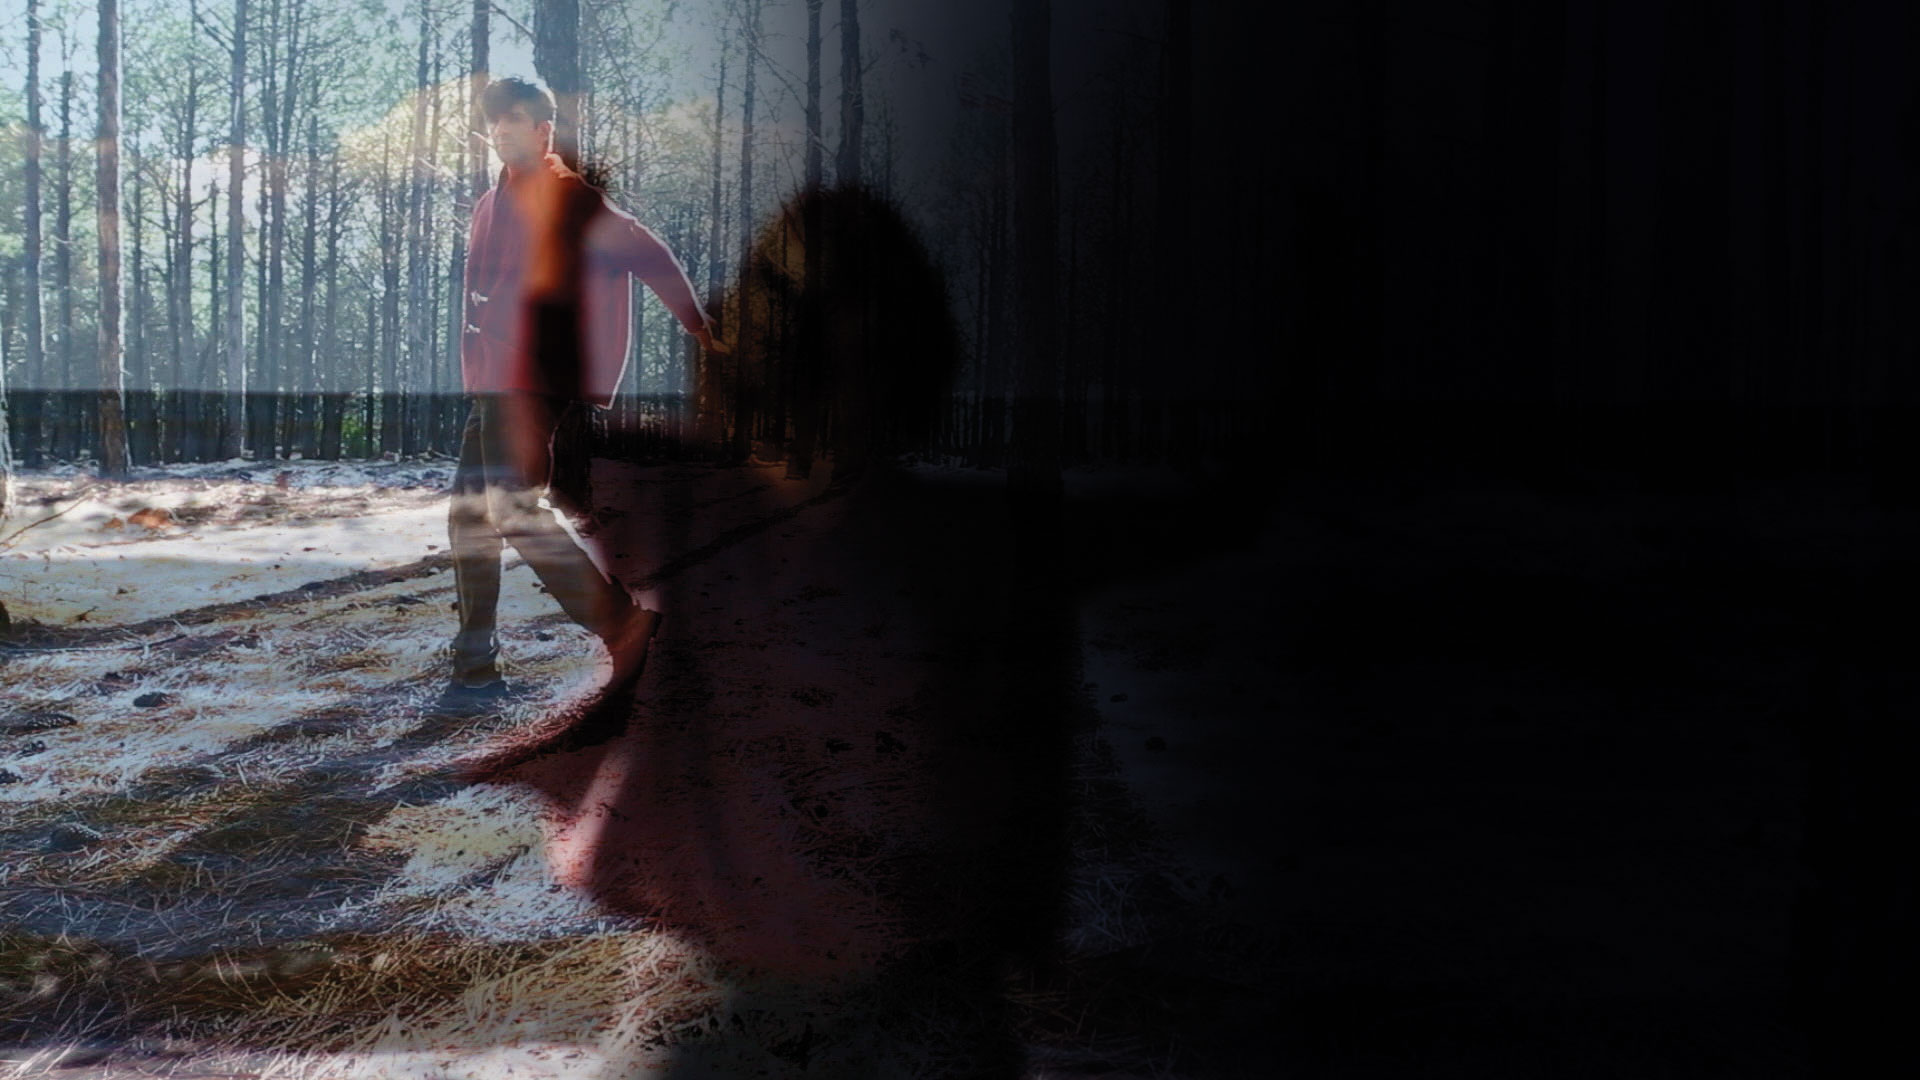 A double exposed image of a shadow of a woman reaching and a man wearing a red jacket walking through a sun dappled forest. 